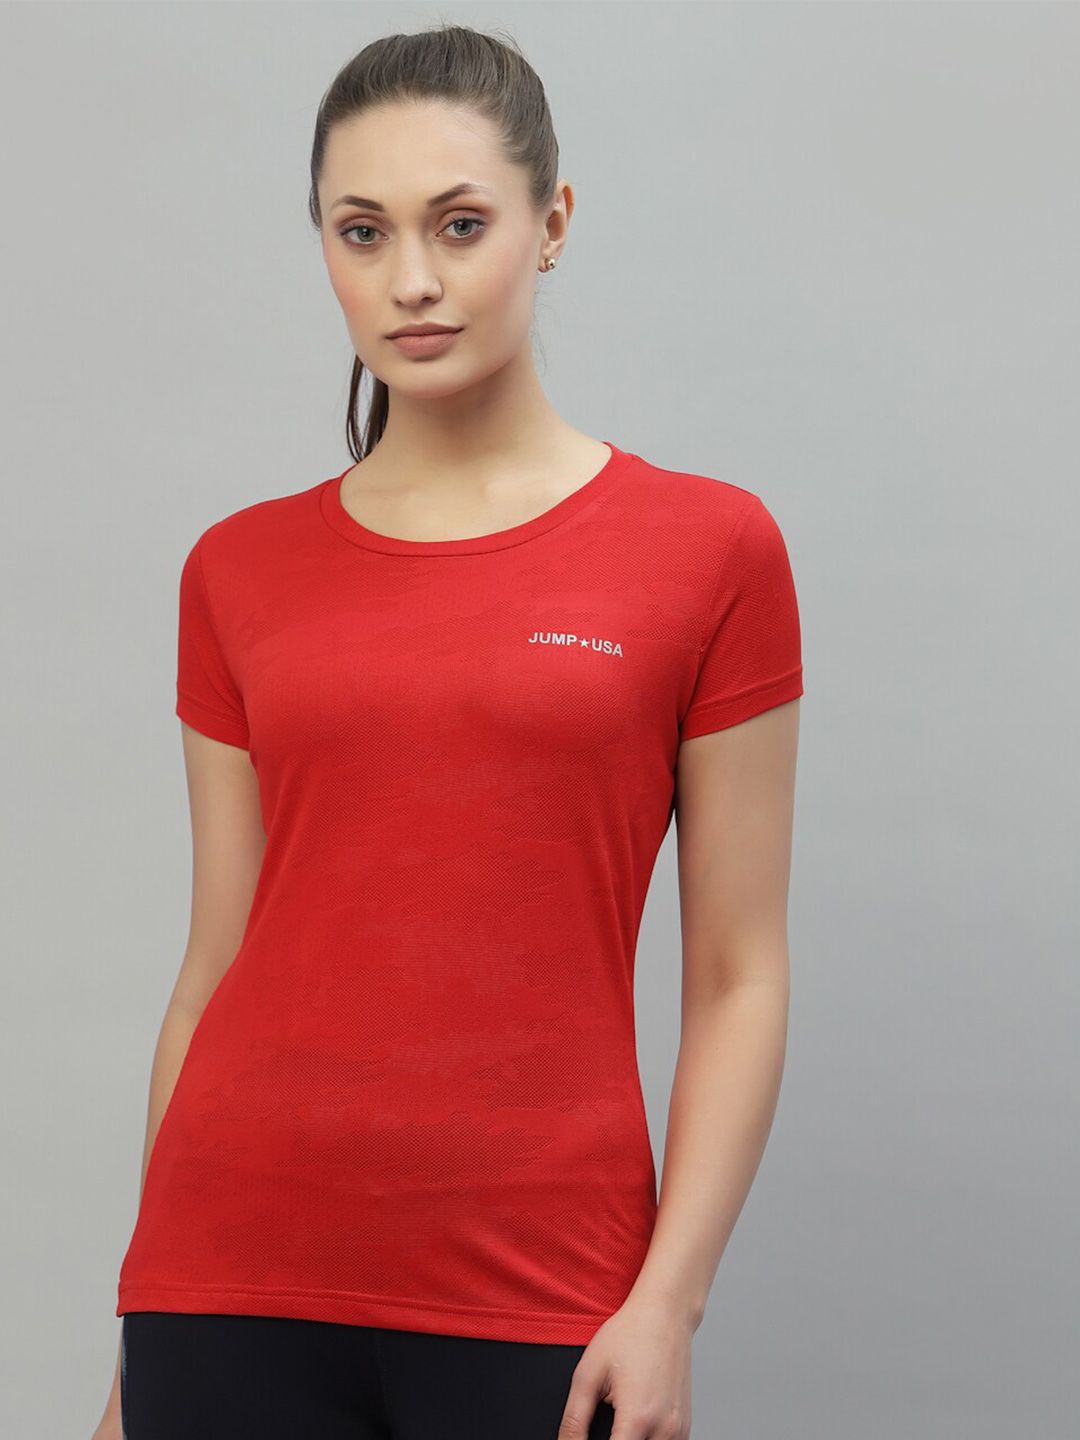 JUMP USA Women Red Rapid-Dry Antimicrobial Round Neck T-shirt Price in India